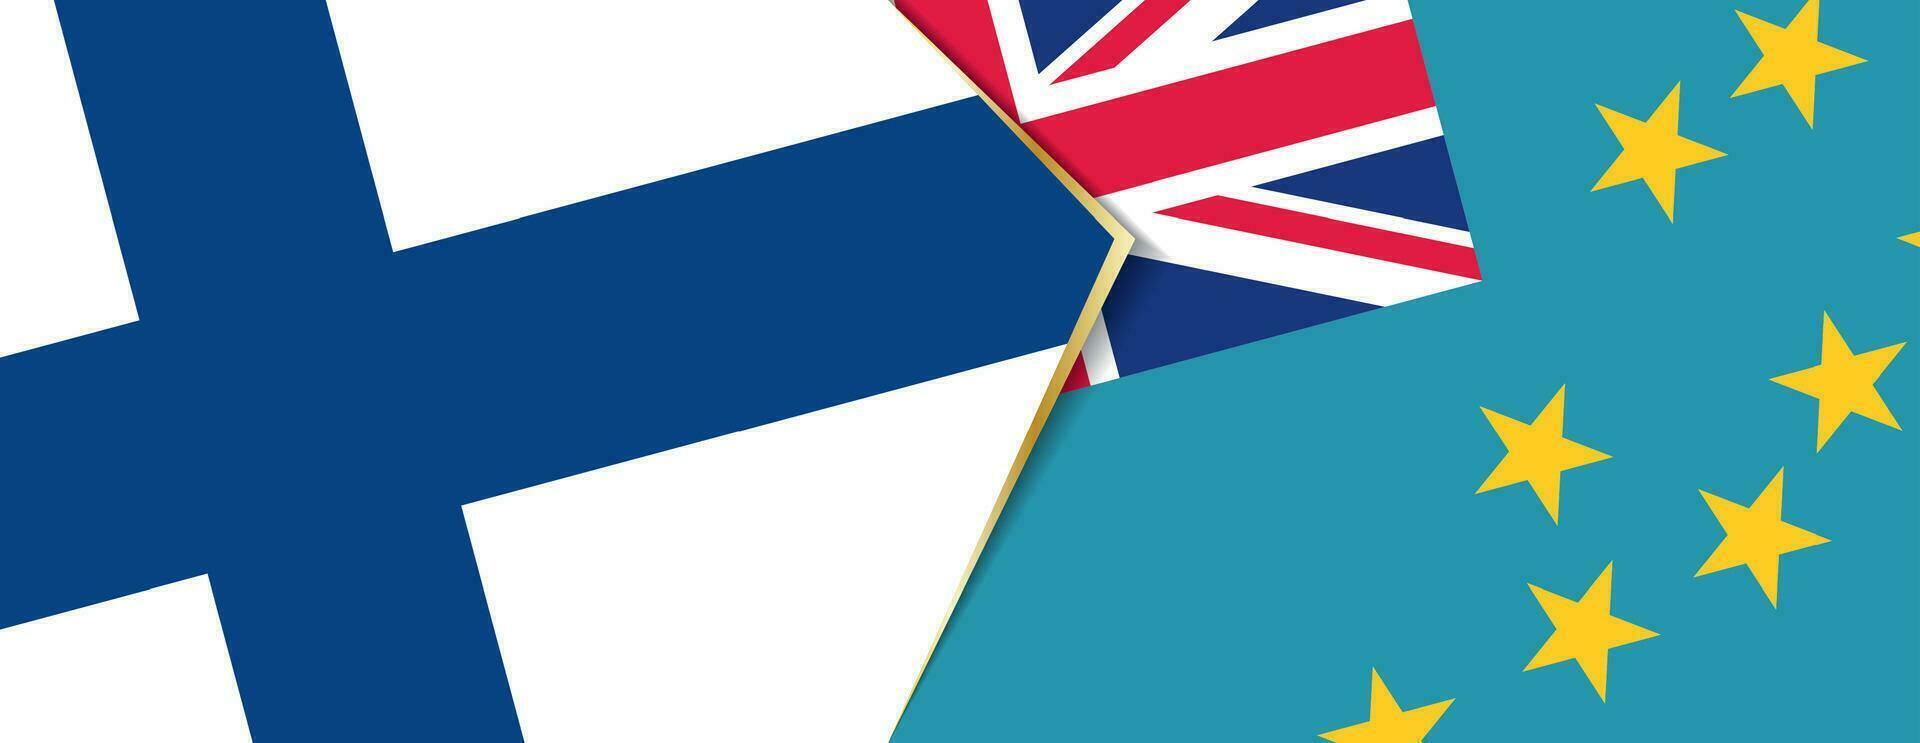 Finland and Tuvalu flags, two vector flags.